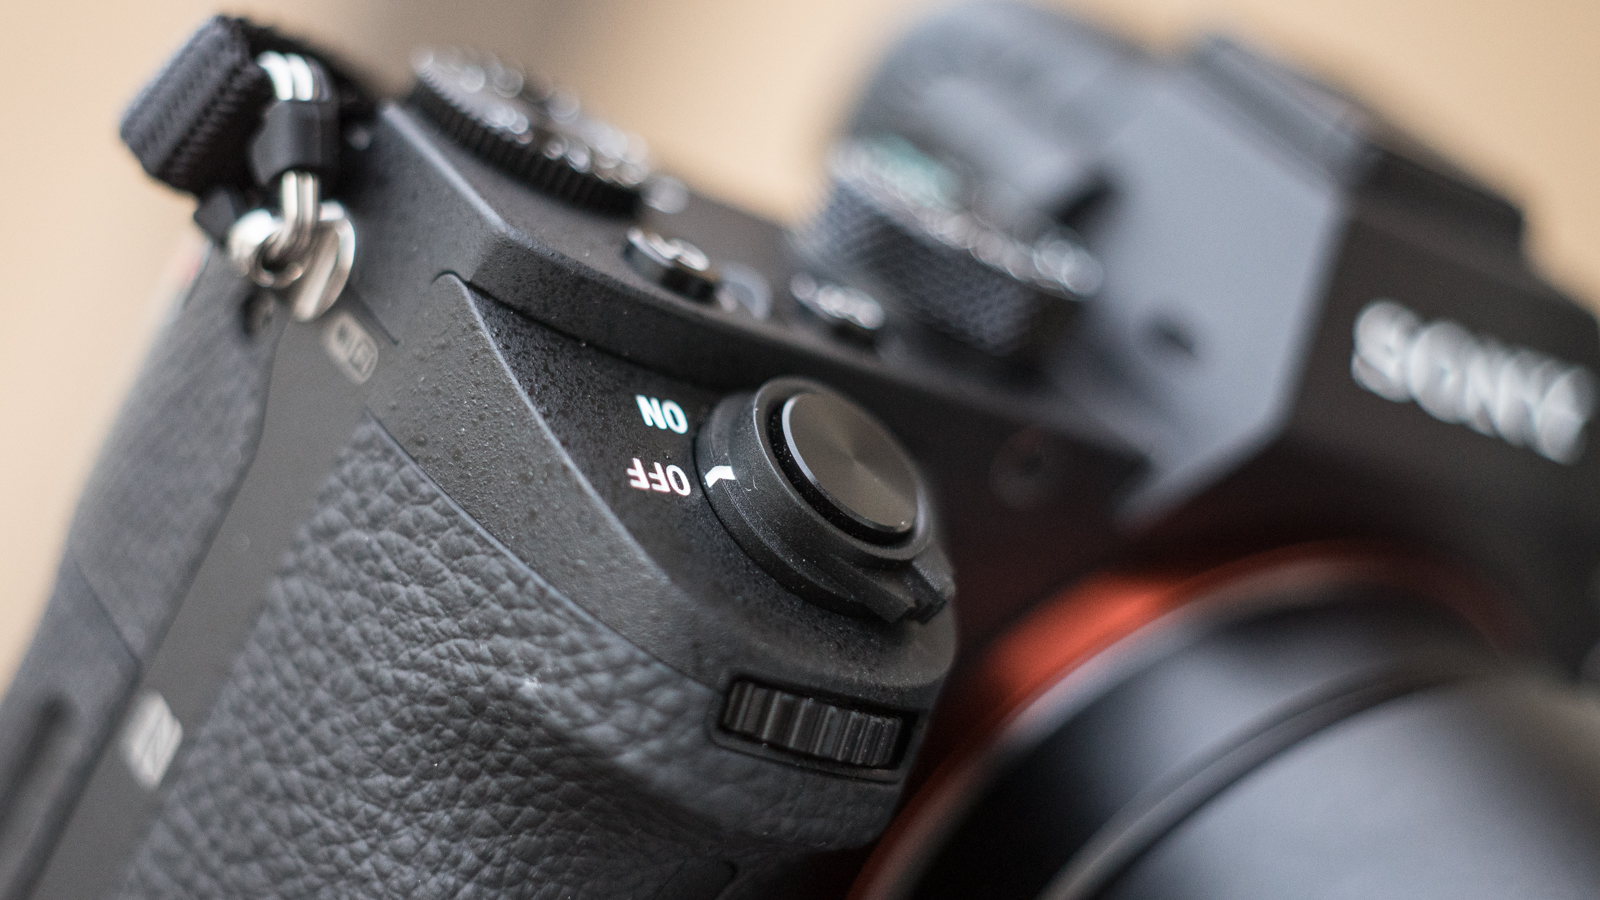 Sony A7 Mark II Hands-On: Here’s What 5-Axis Stabilisation Can Do